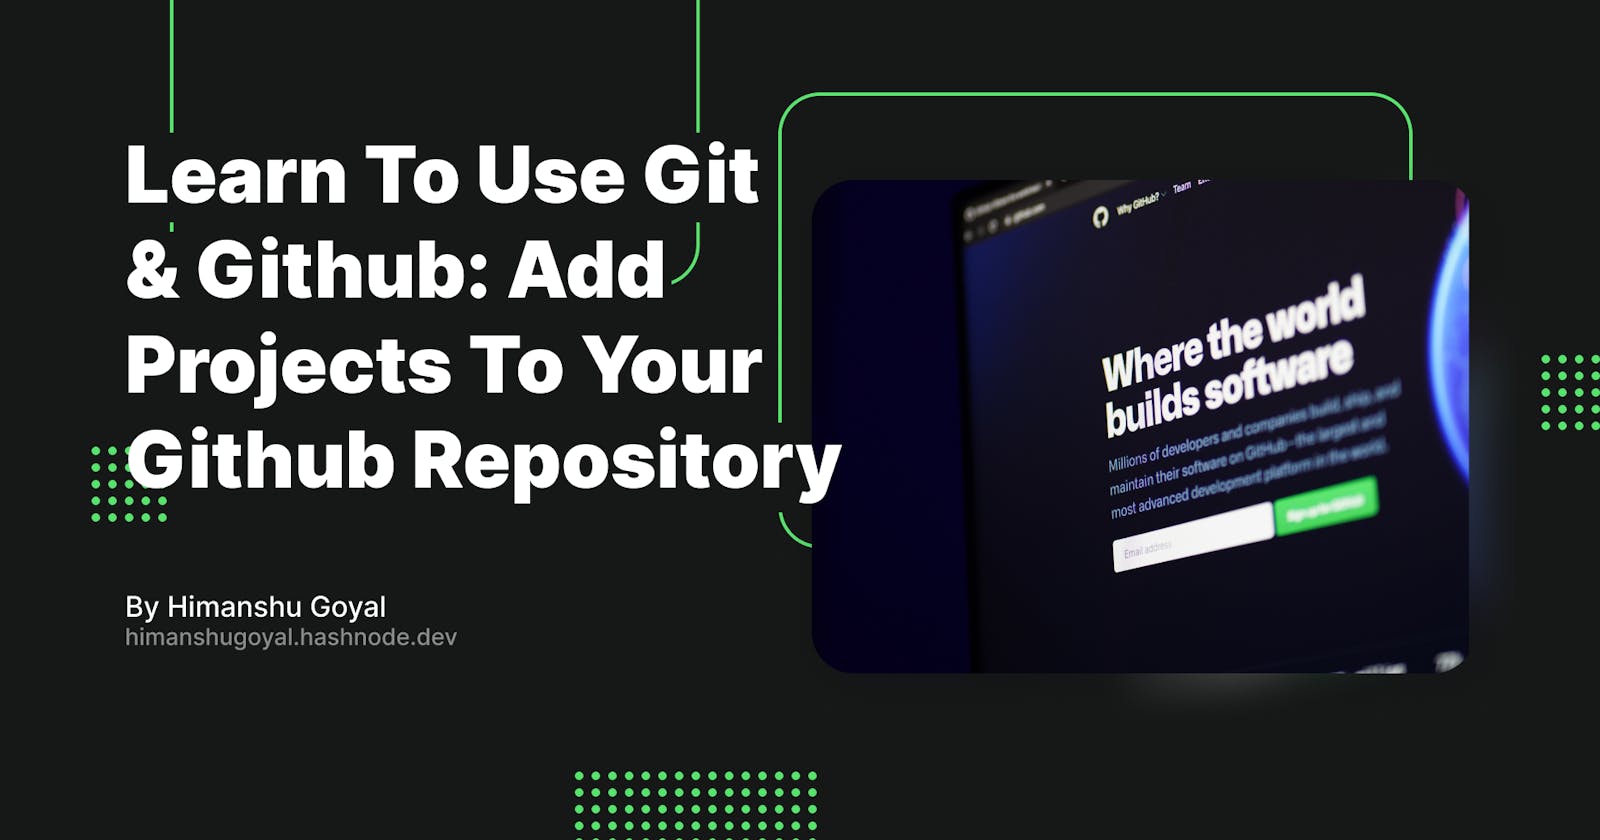 Learn To Use Git & Github: Add Projects To Your Github Repository